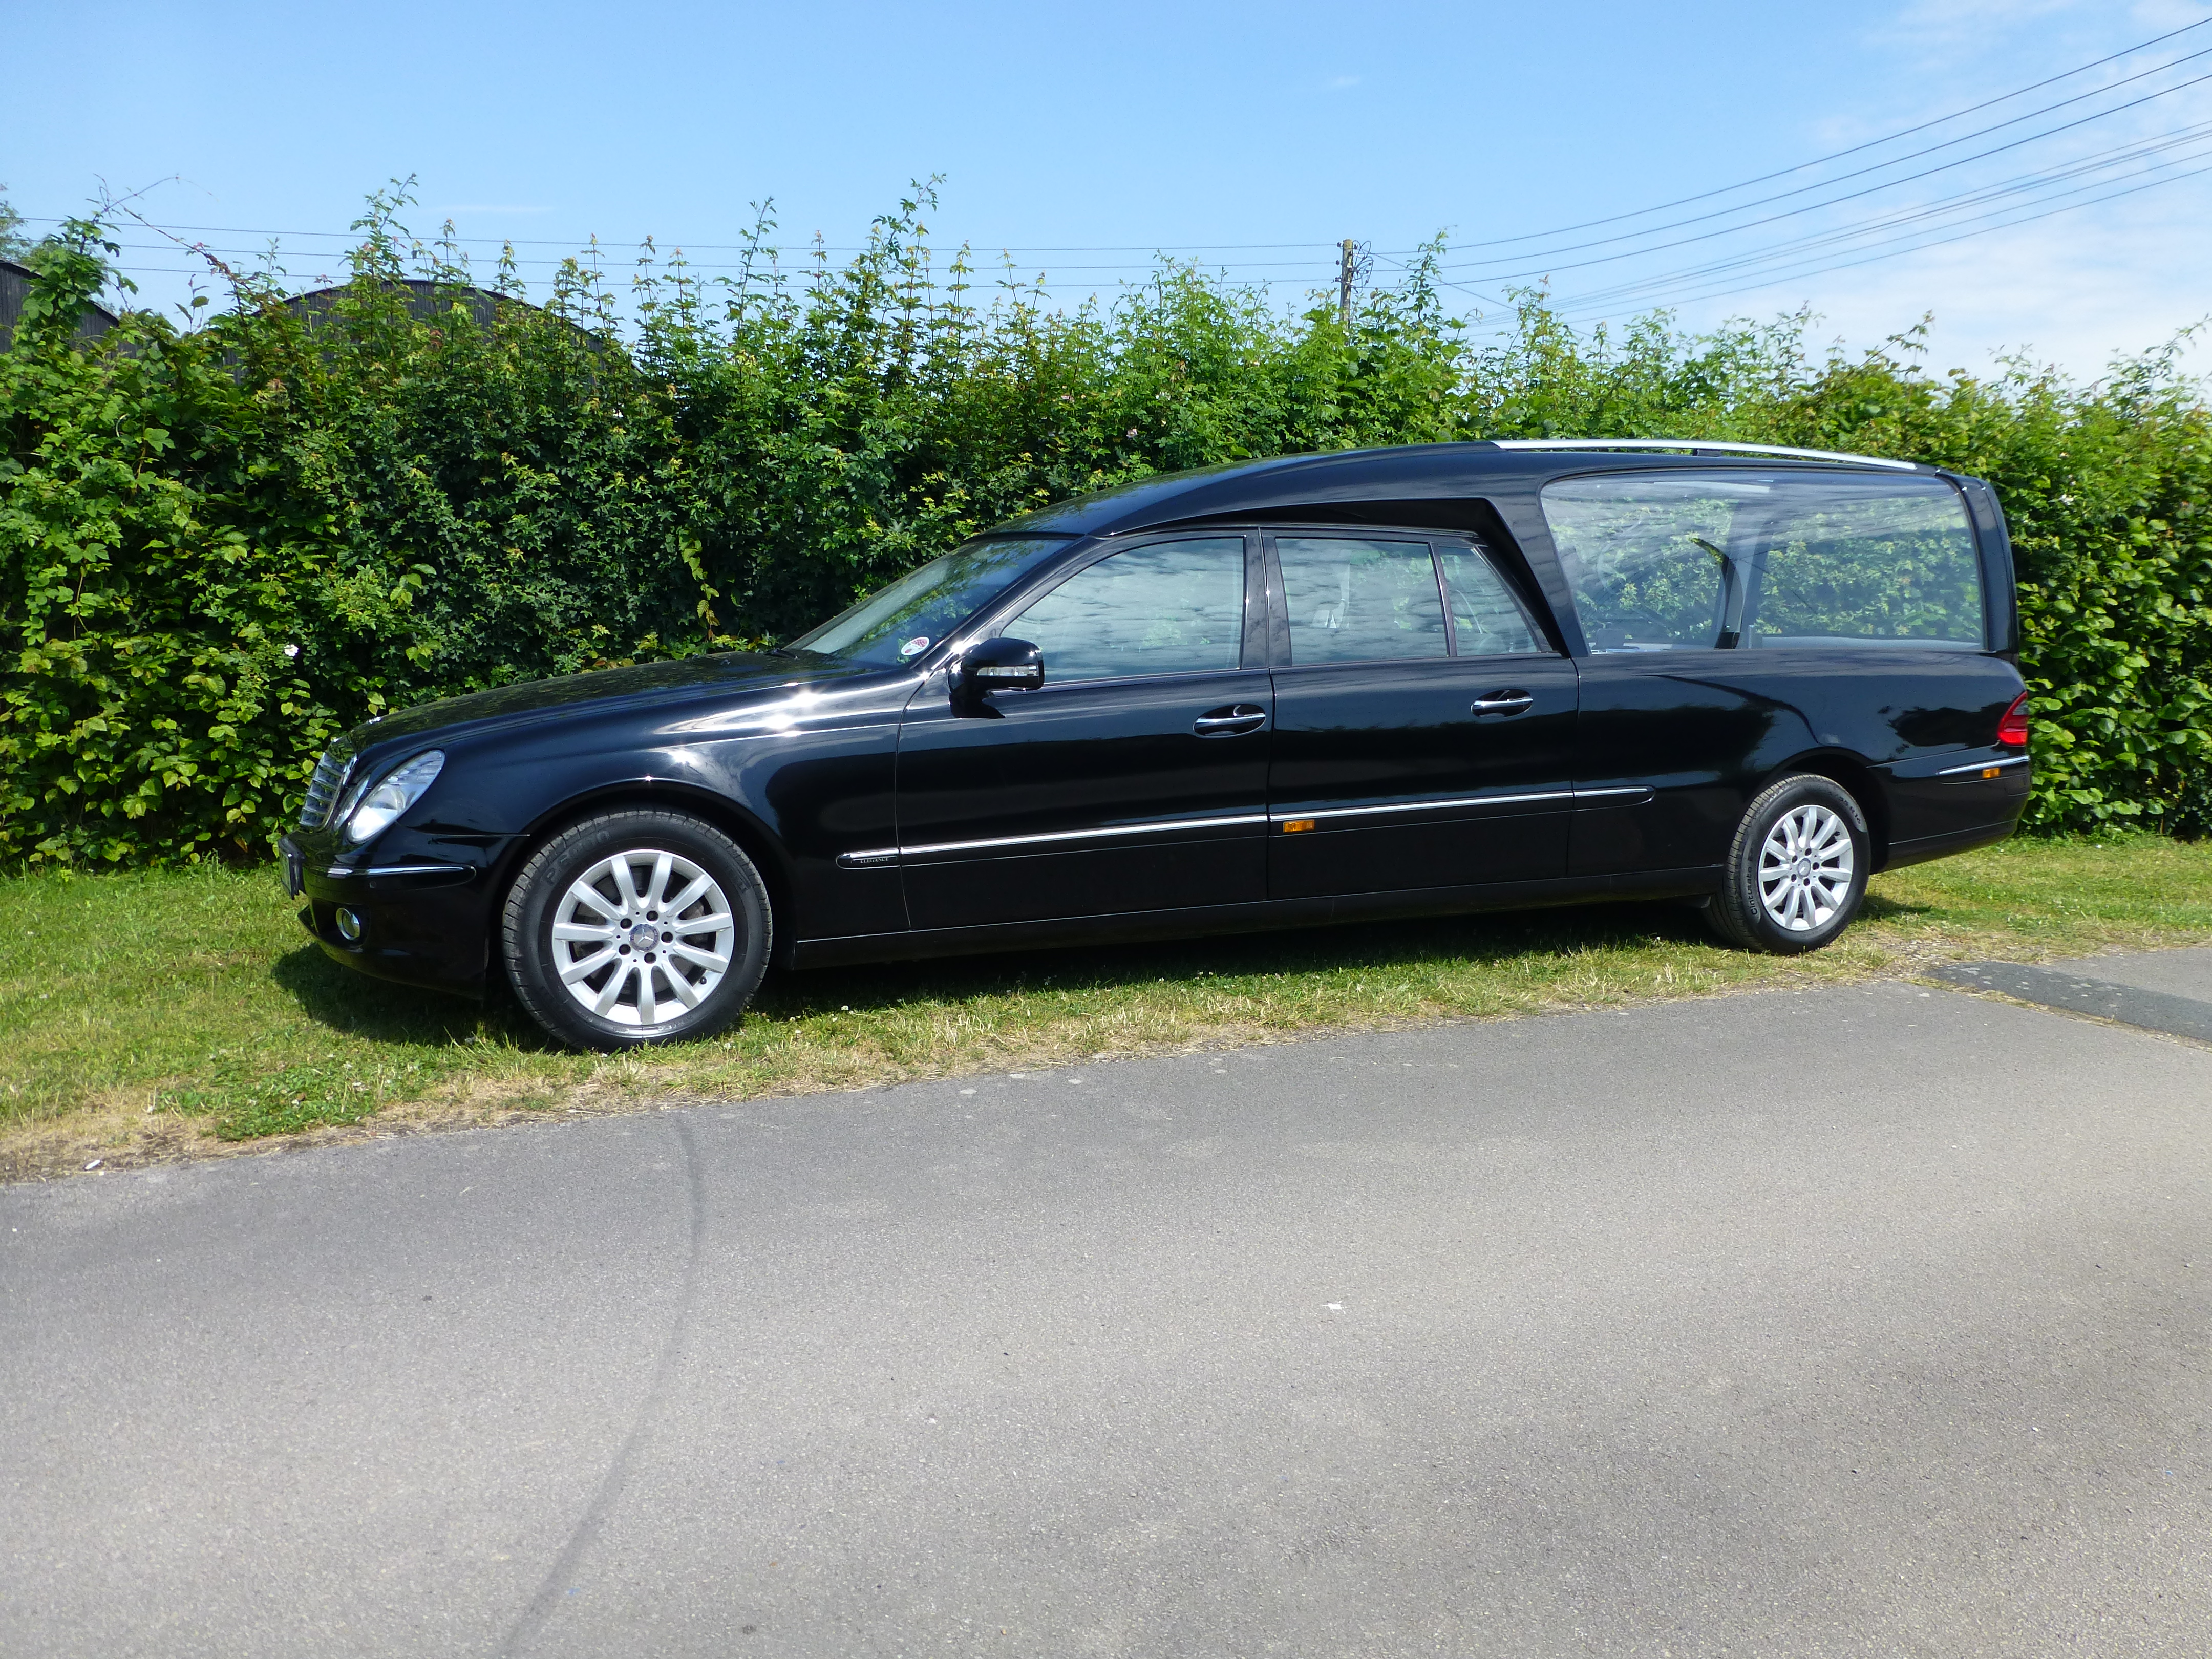 First fleet for Goodridge Milford Funeral Directors comes from Superior UK